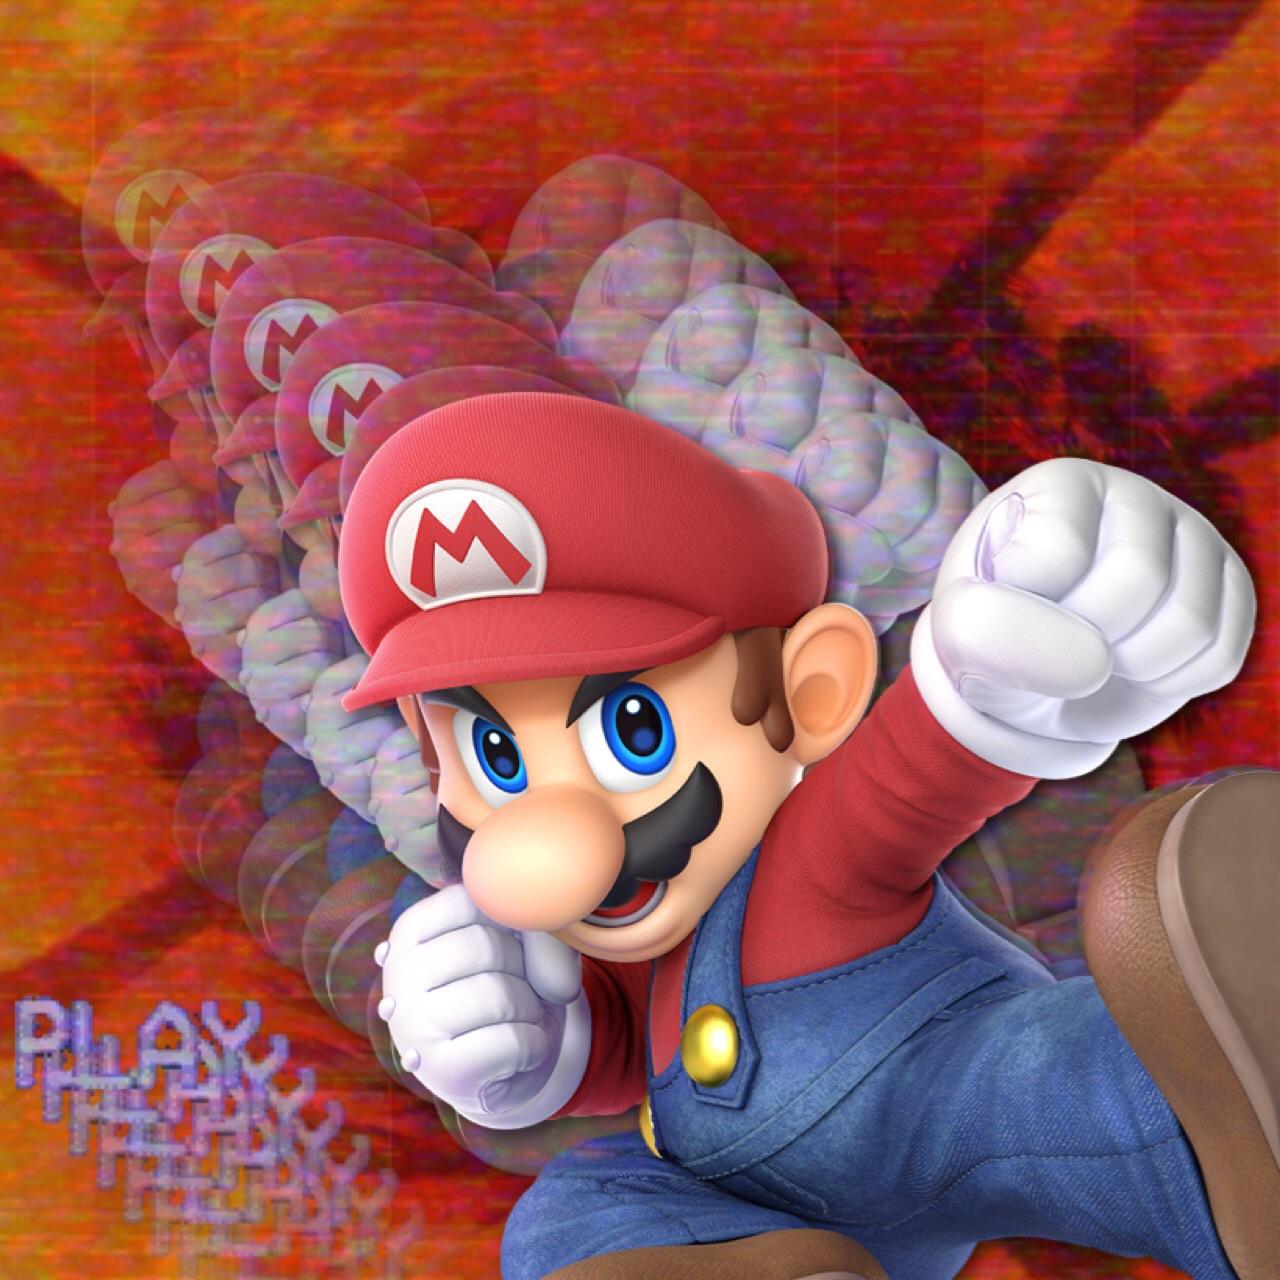 A picture of Mario giving a thumbs up with a colorful background - Super Mario